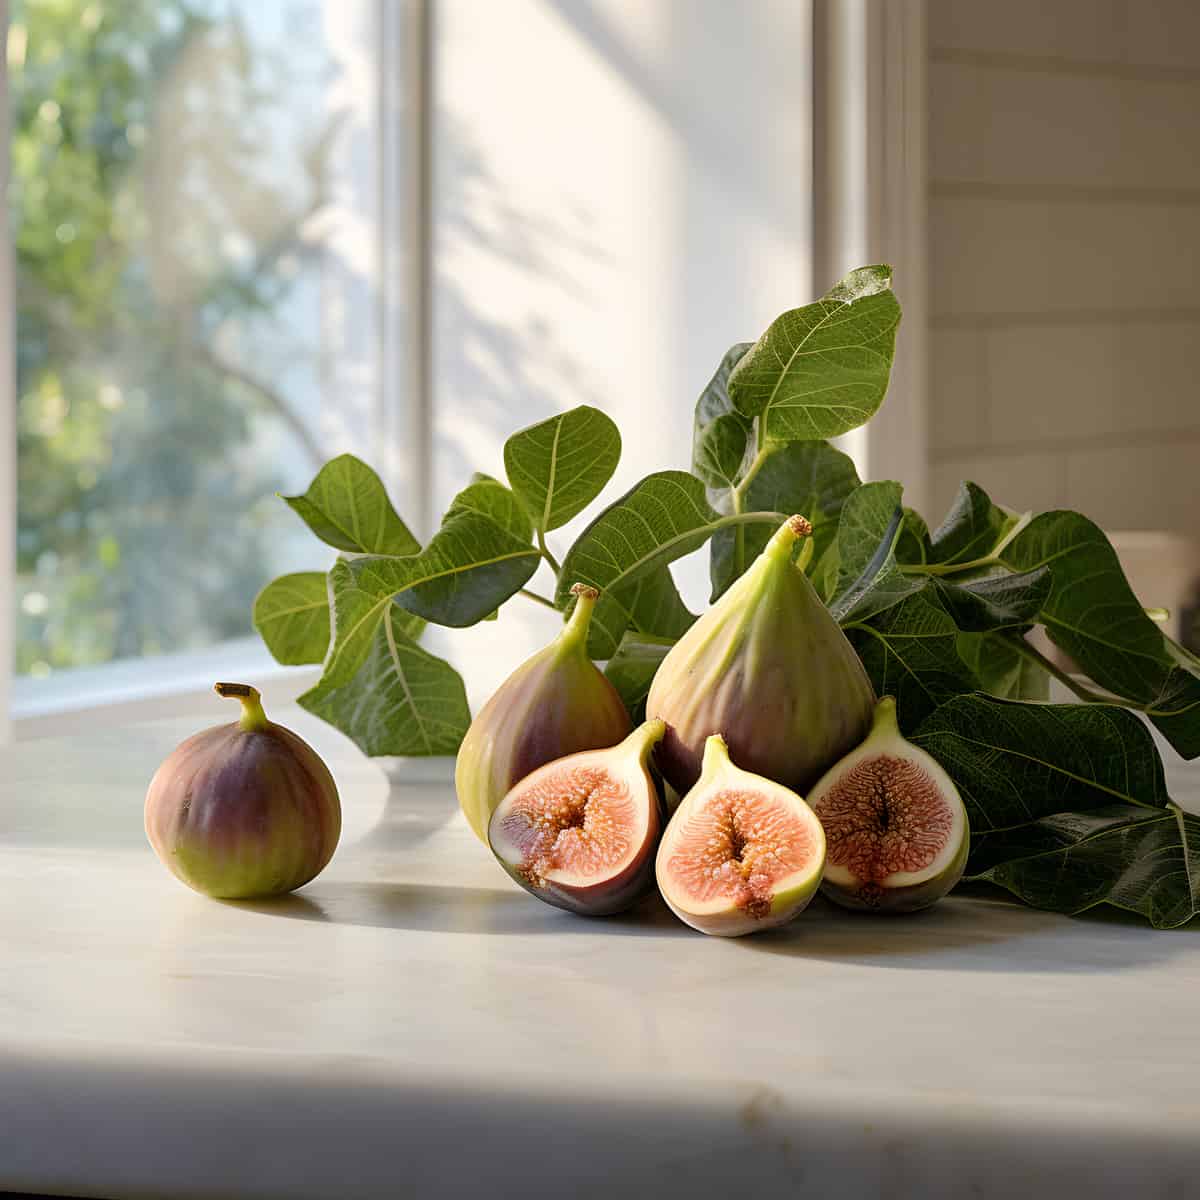 Japanese Fig Fruit on a kitchen counter